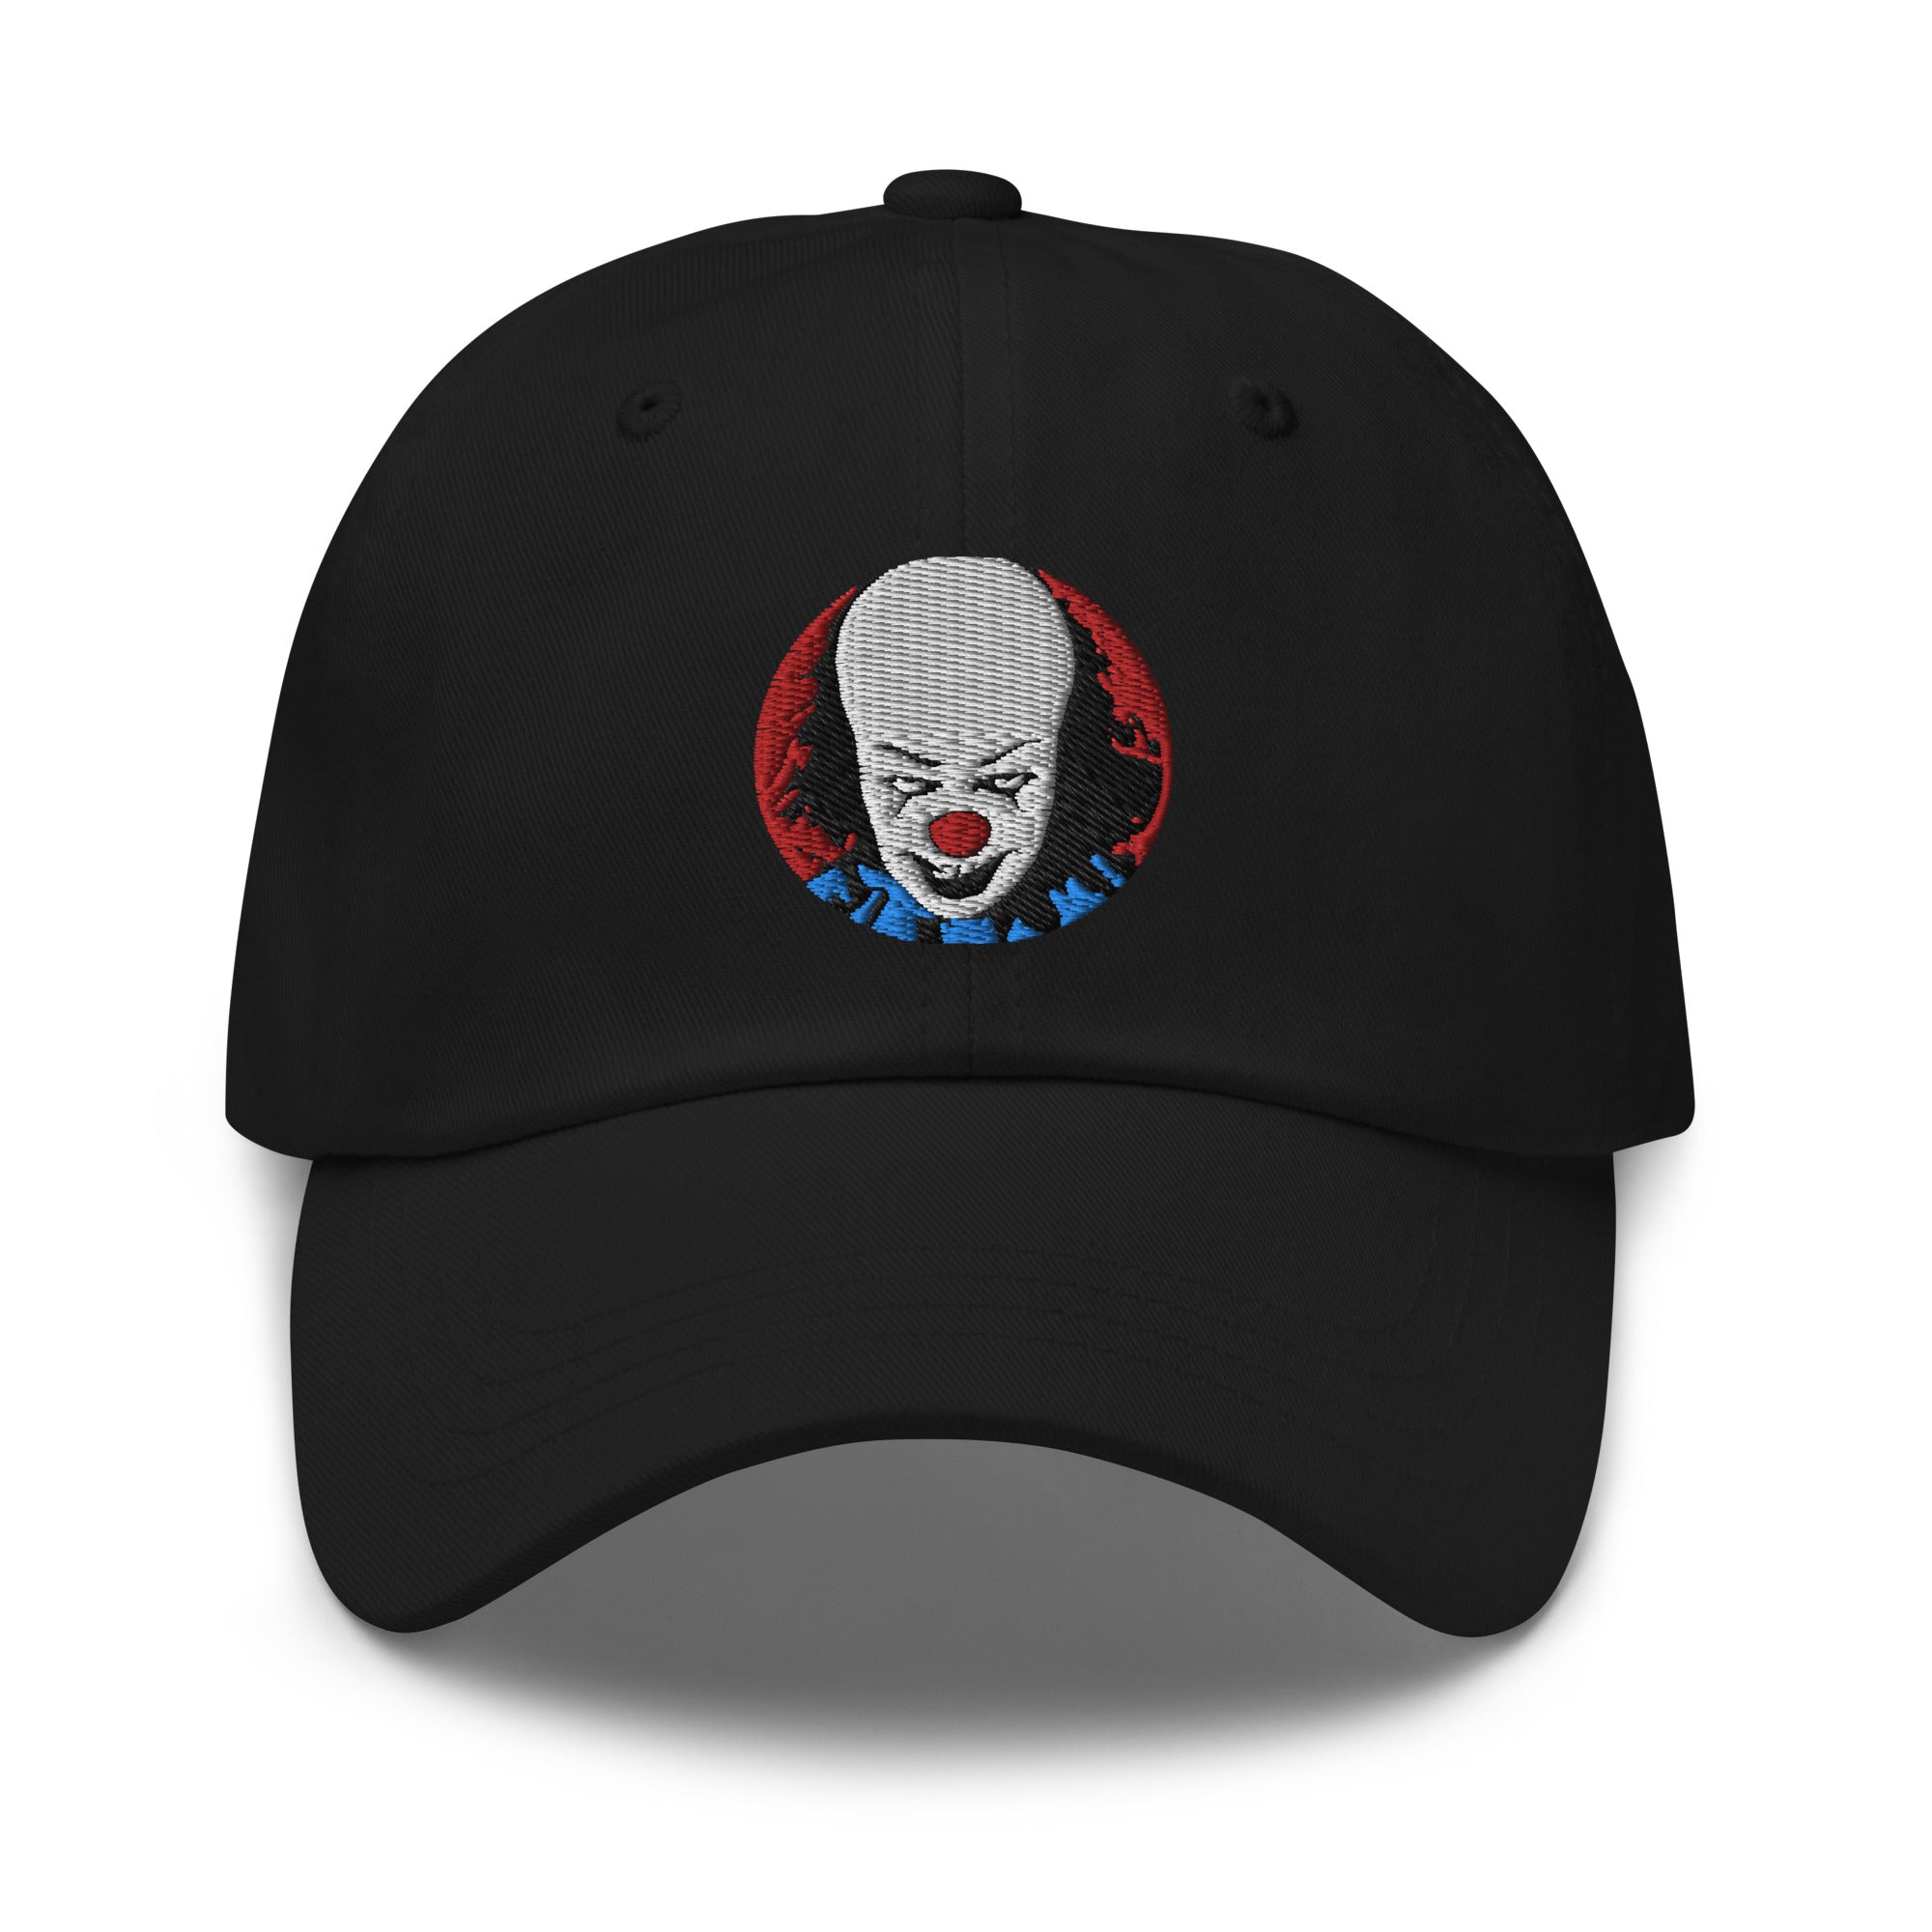 Pennywise The Evil Clown Embroidered Baseball Cap IT Dad hat - Edge of Life Designs